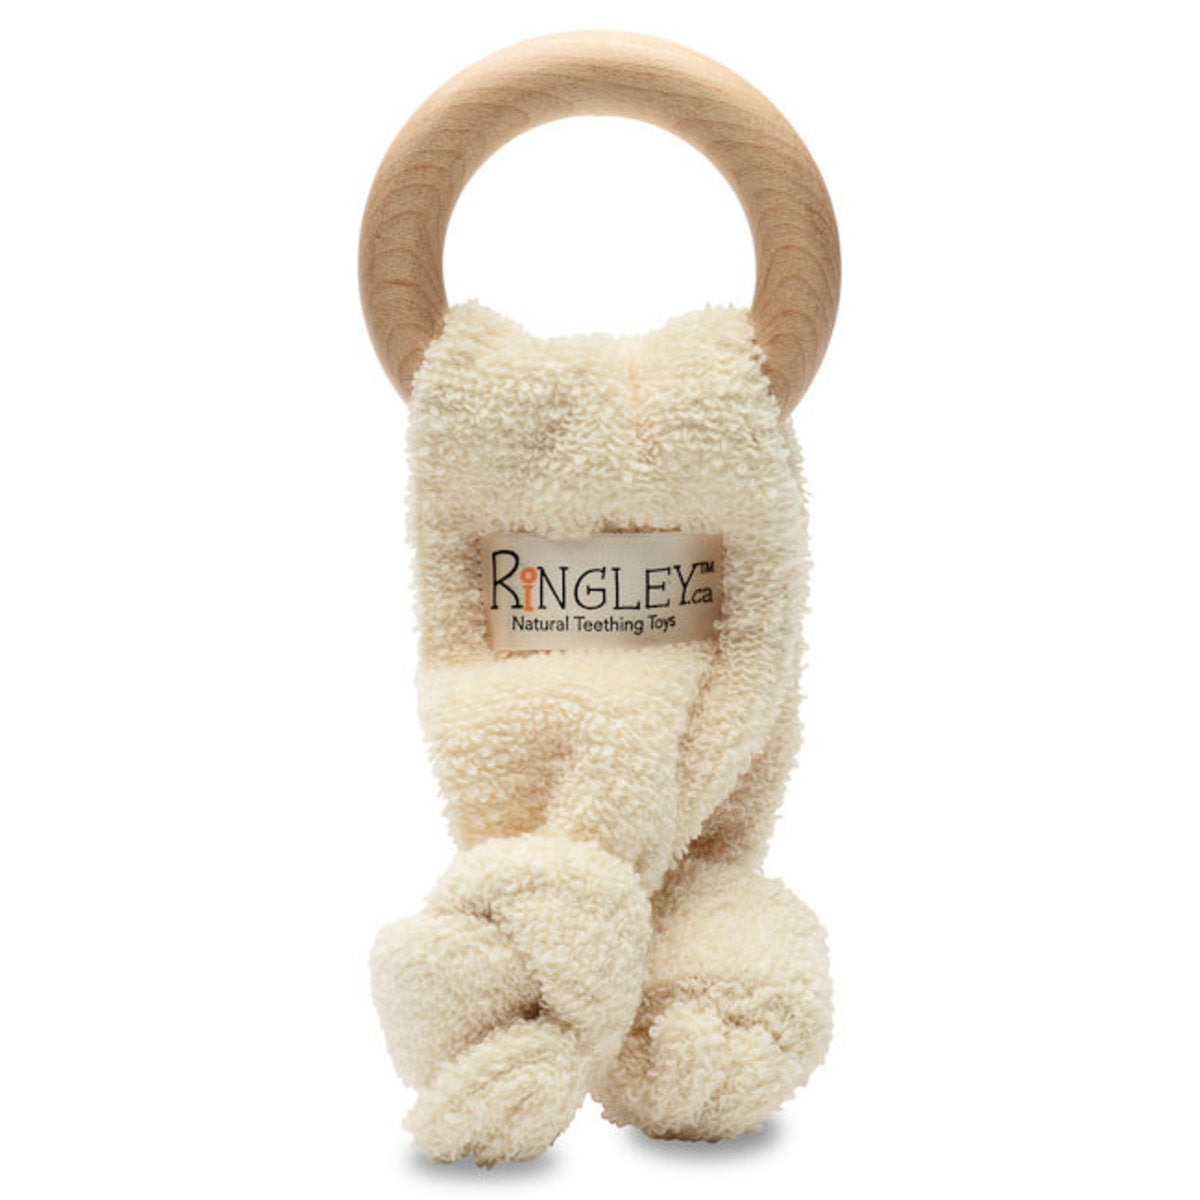 Ringley Organic Cotton Knotted Teether toy